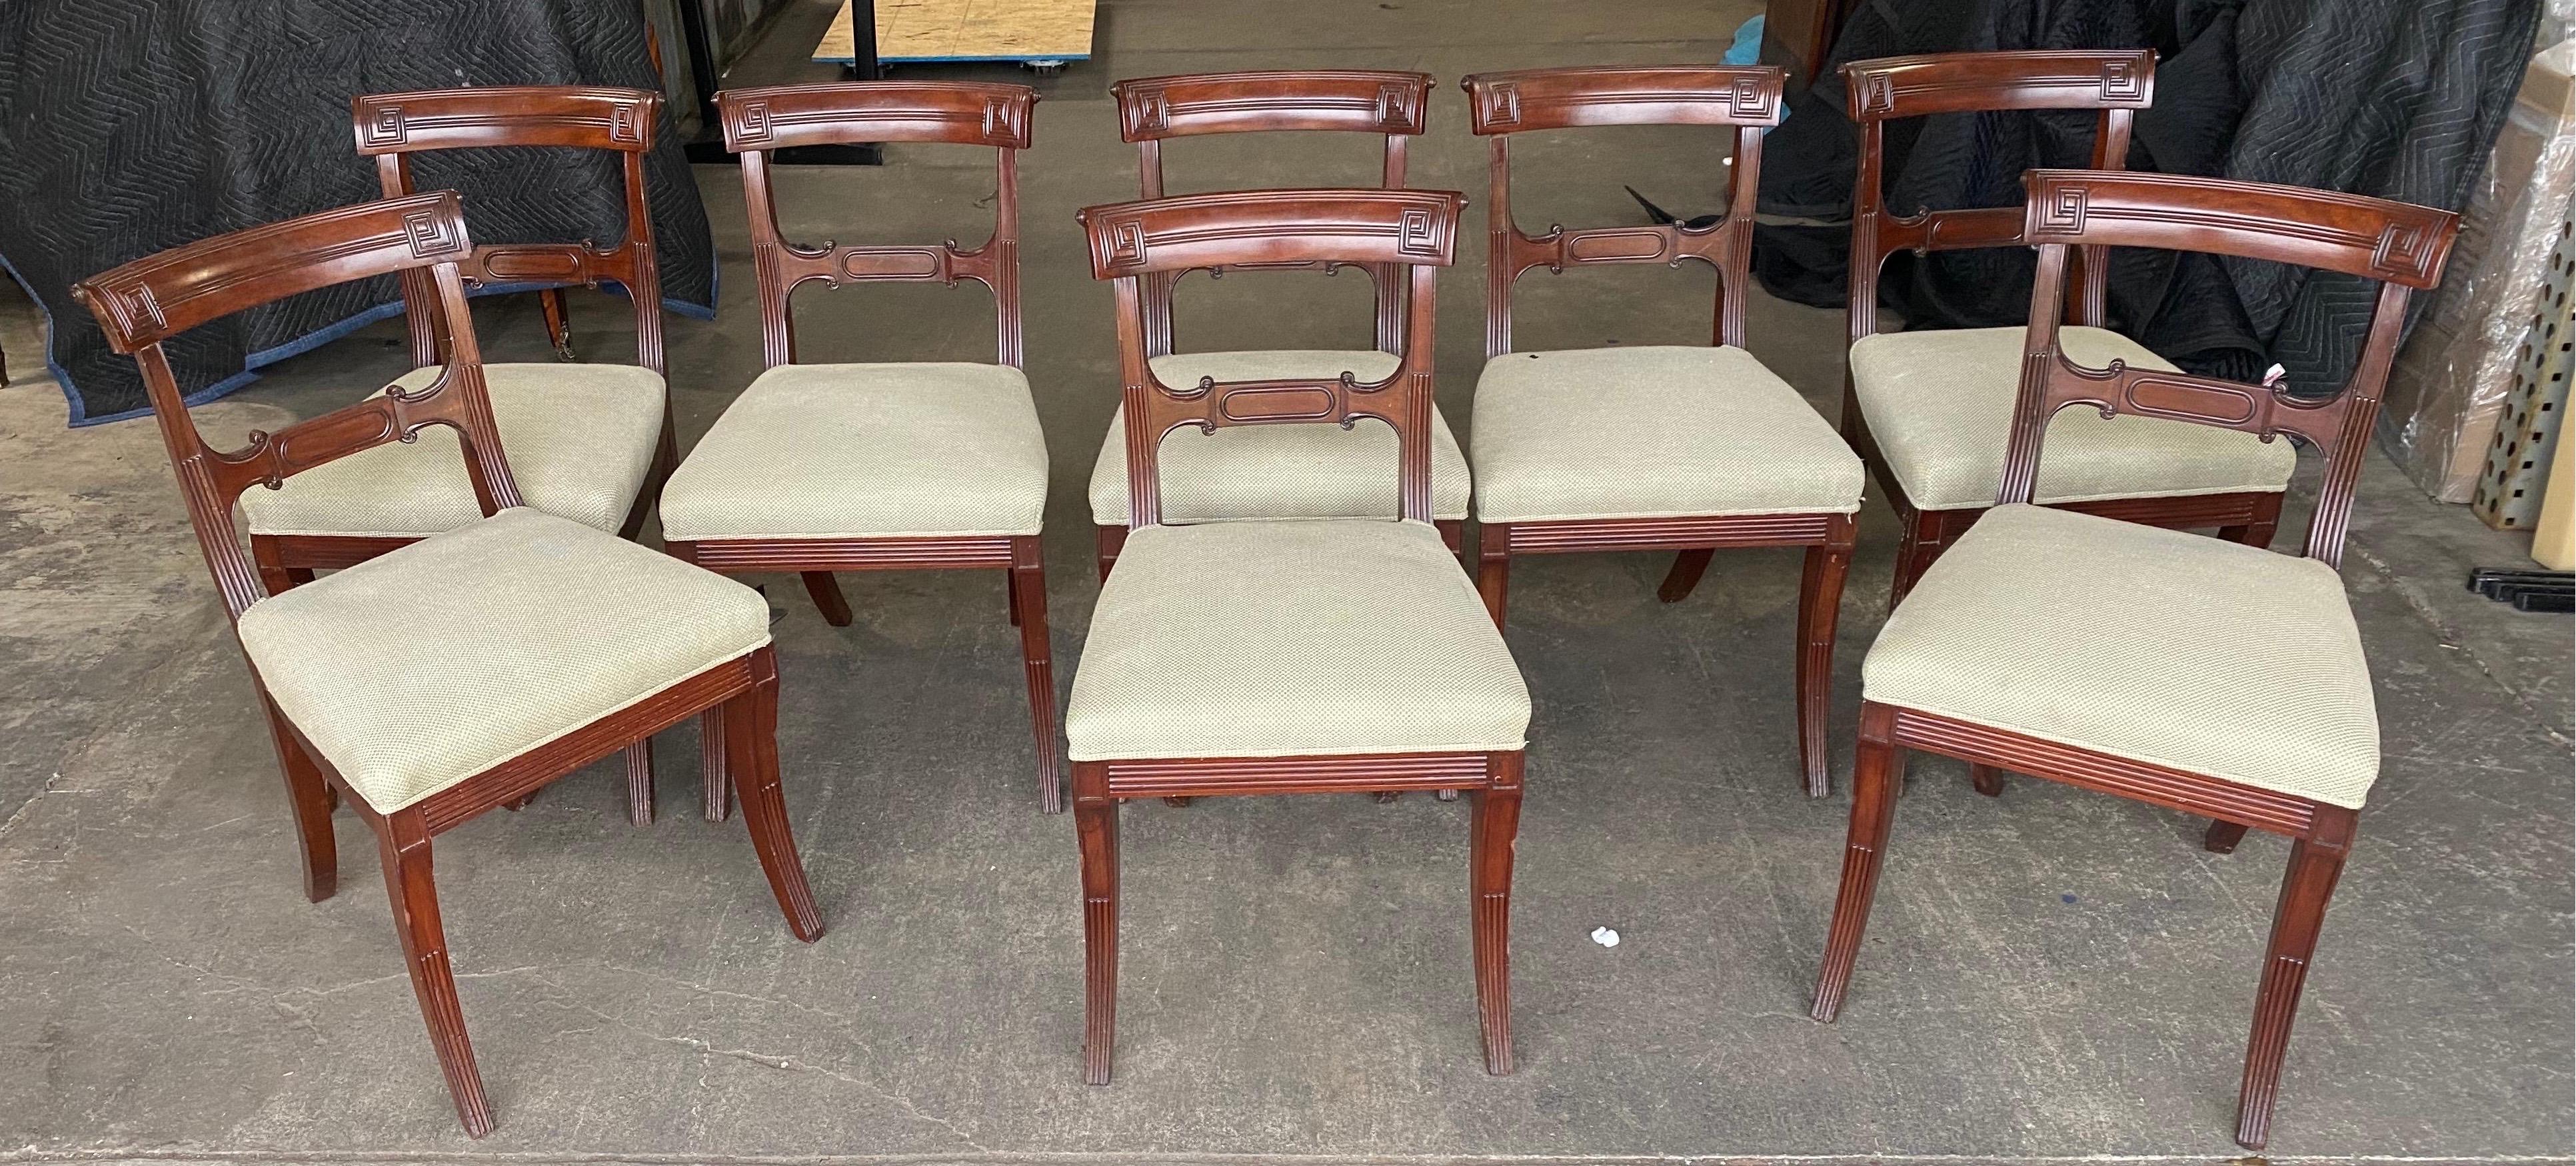 Set of 8 19th Century English Mahogany Side Chairs with Greek Key and Saber Legs In Good Condition For Sale In Charleston, SC